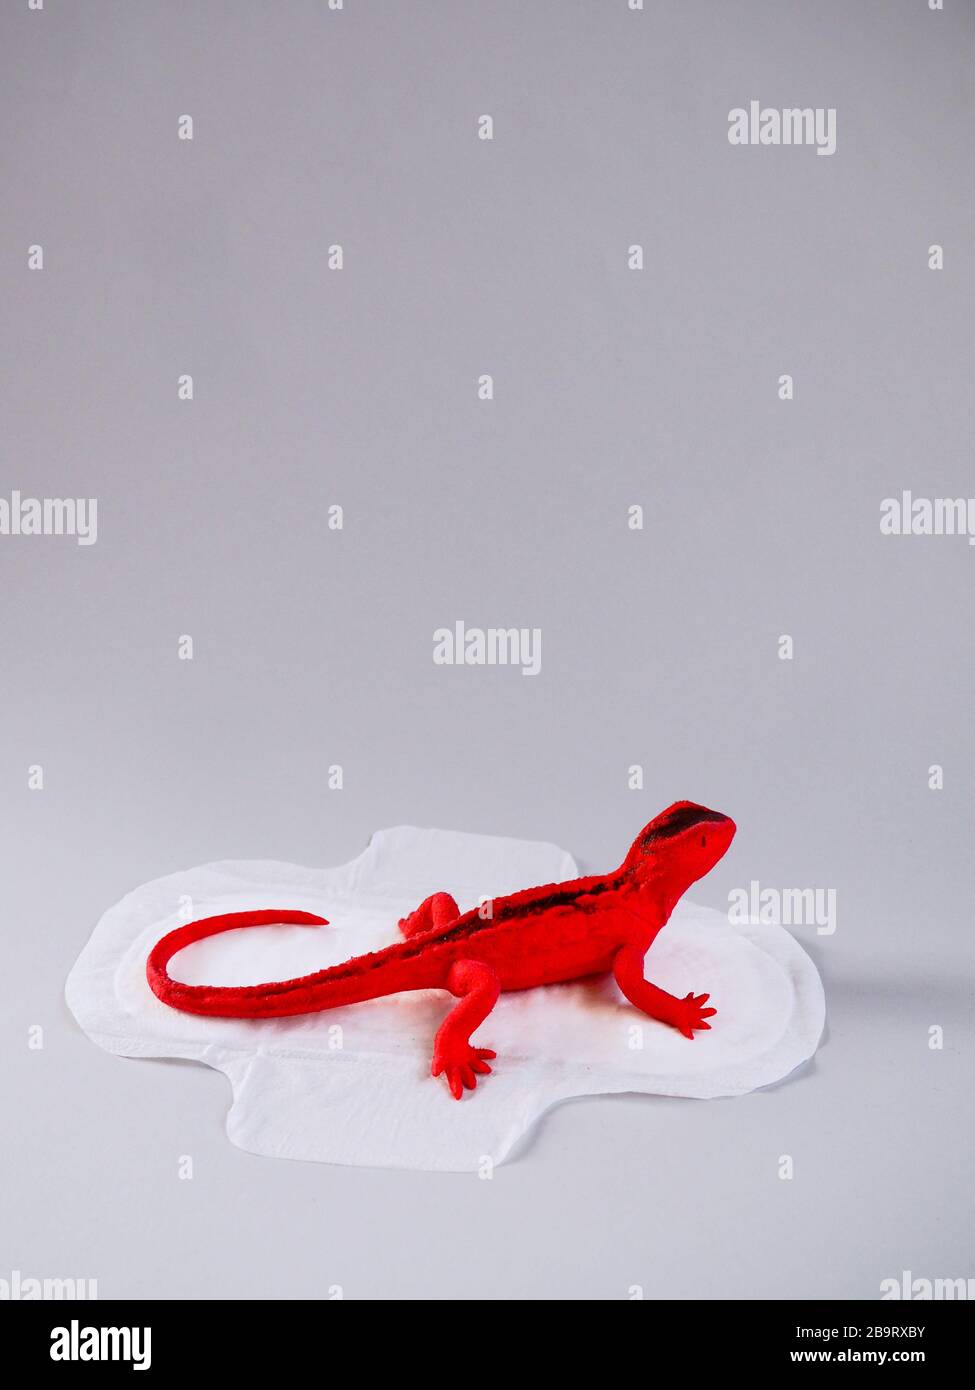 Menstrual pad with red lizard on gray background. Minimalist still life photography concept. Women critical days, gynecological menstruation cycle. Stock Photo